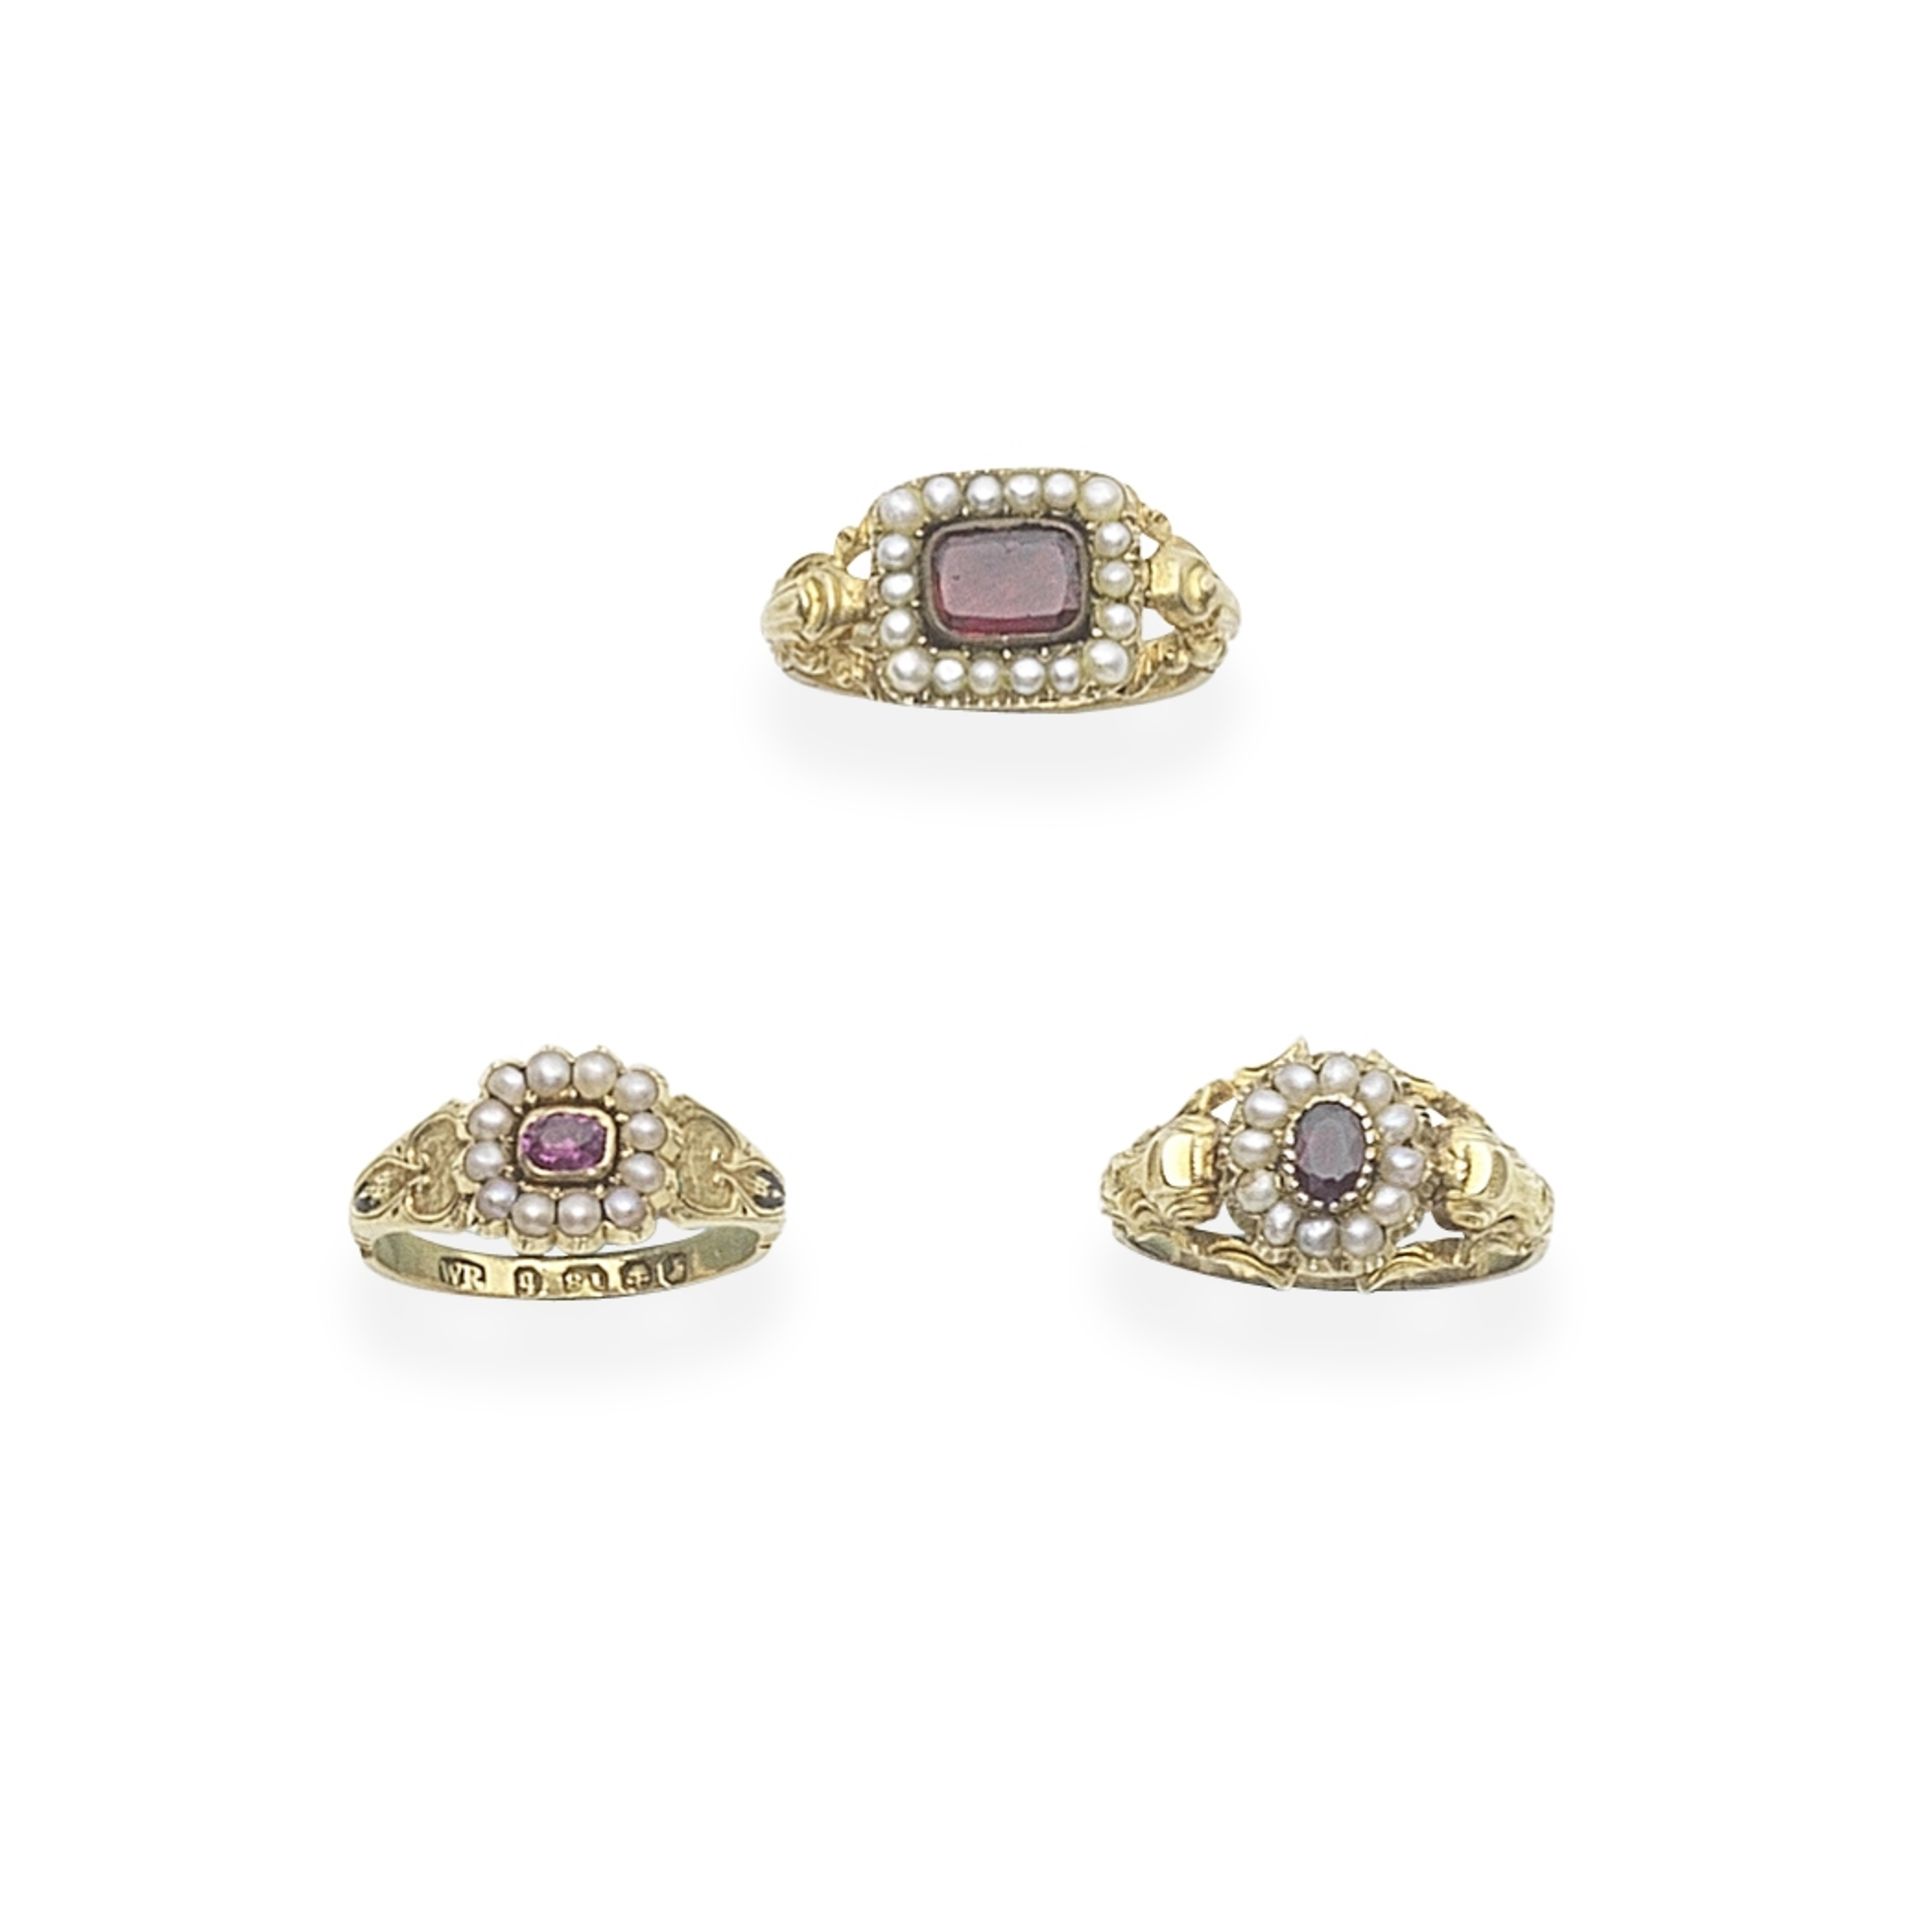 THREE SEED PEARL AND GEM-SET CLUSTER RINGS,